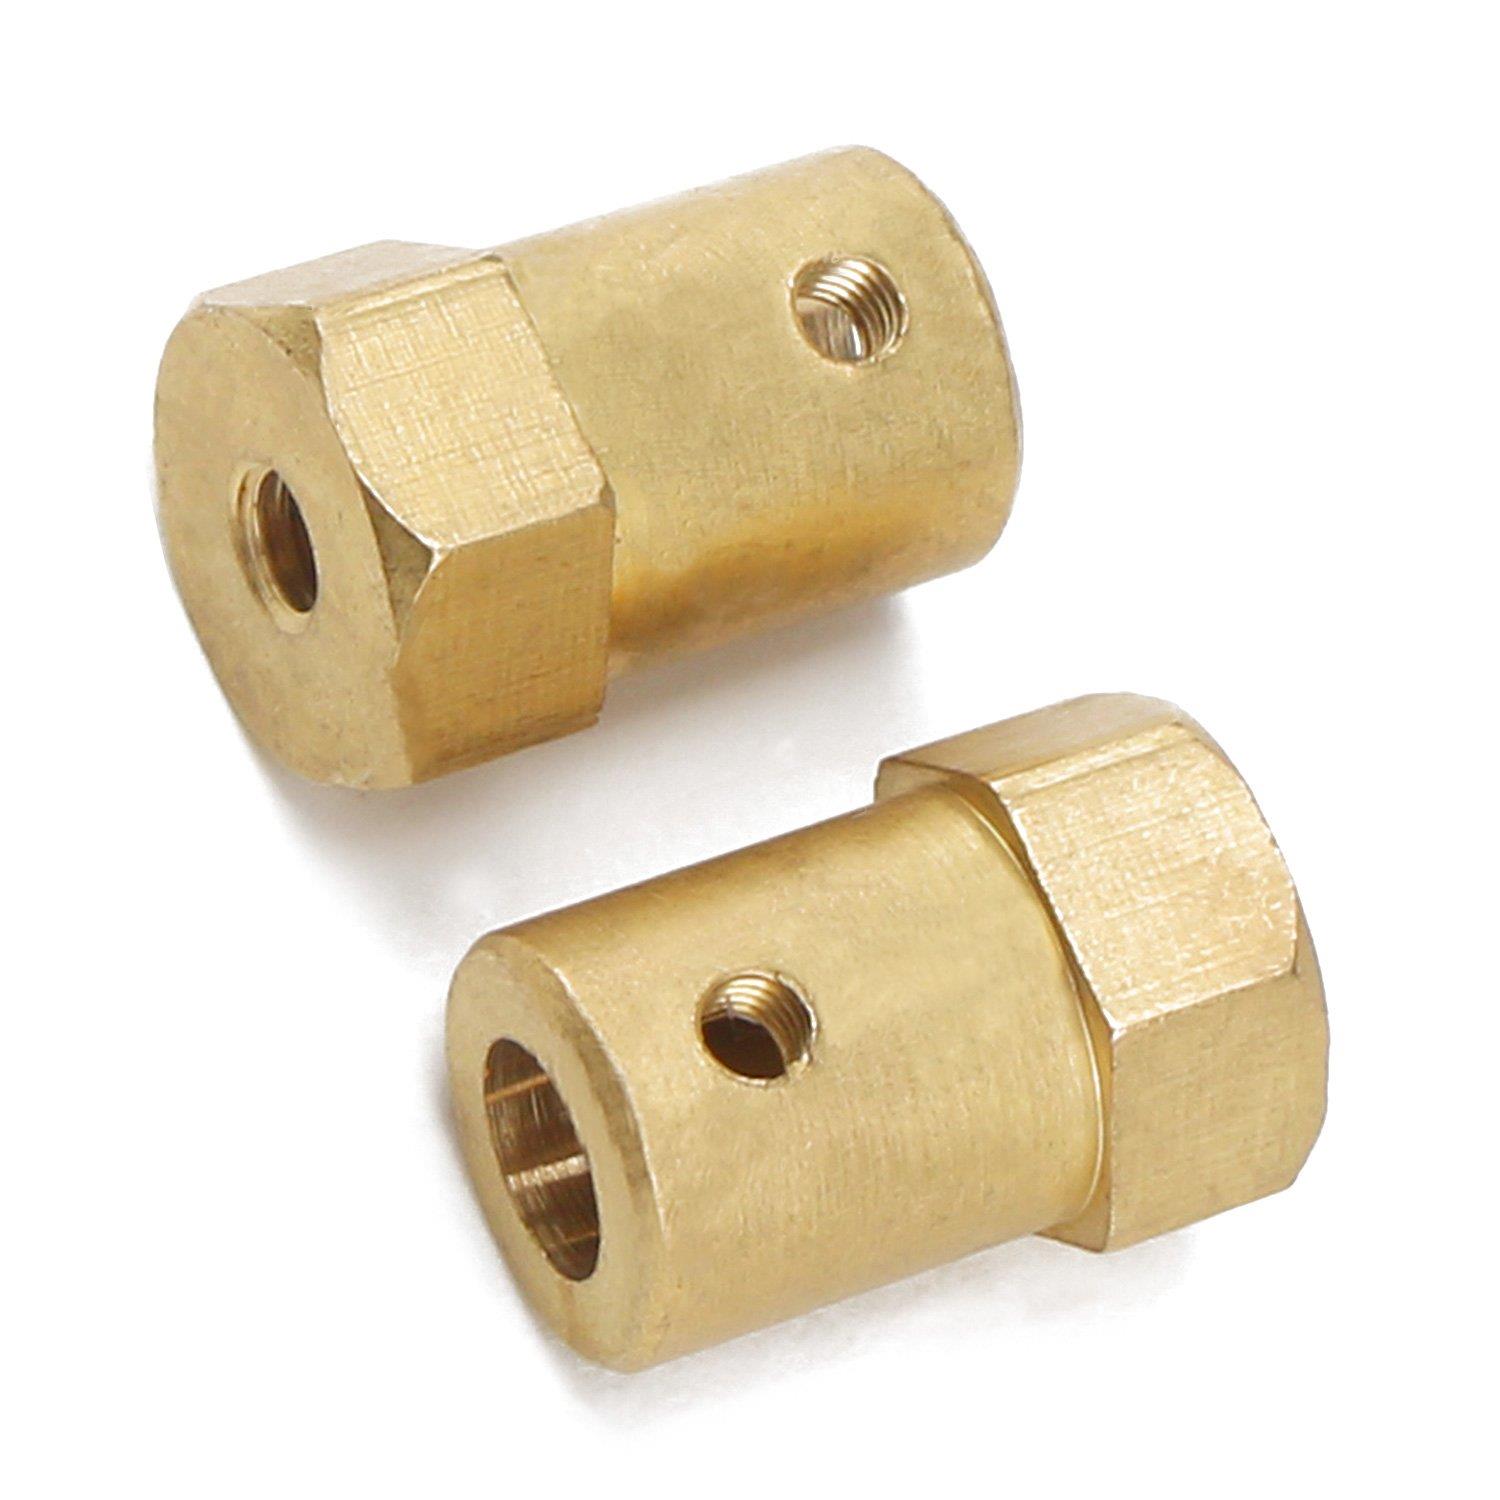 Hex coupling tire connector [2pcs Pack]